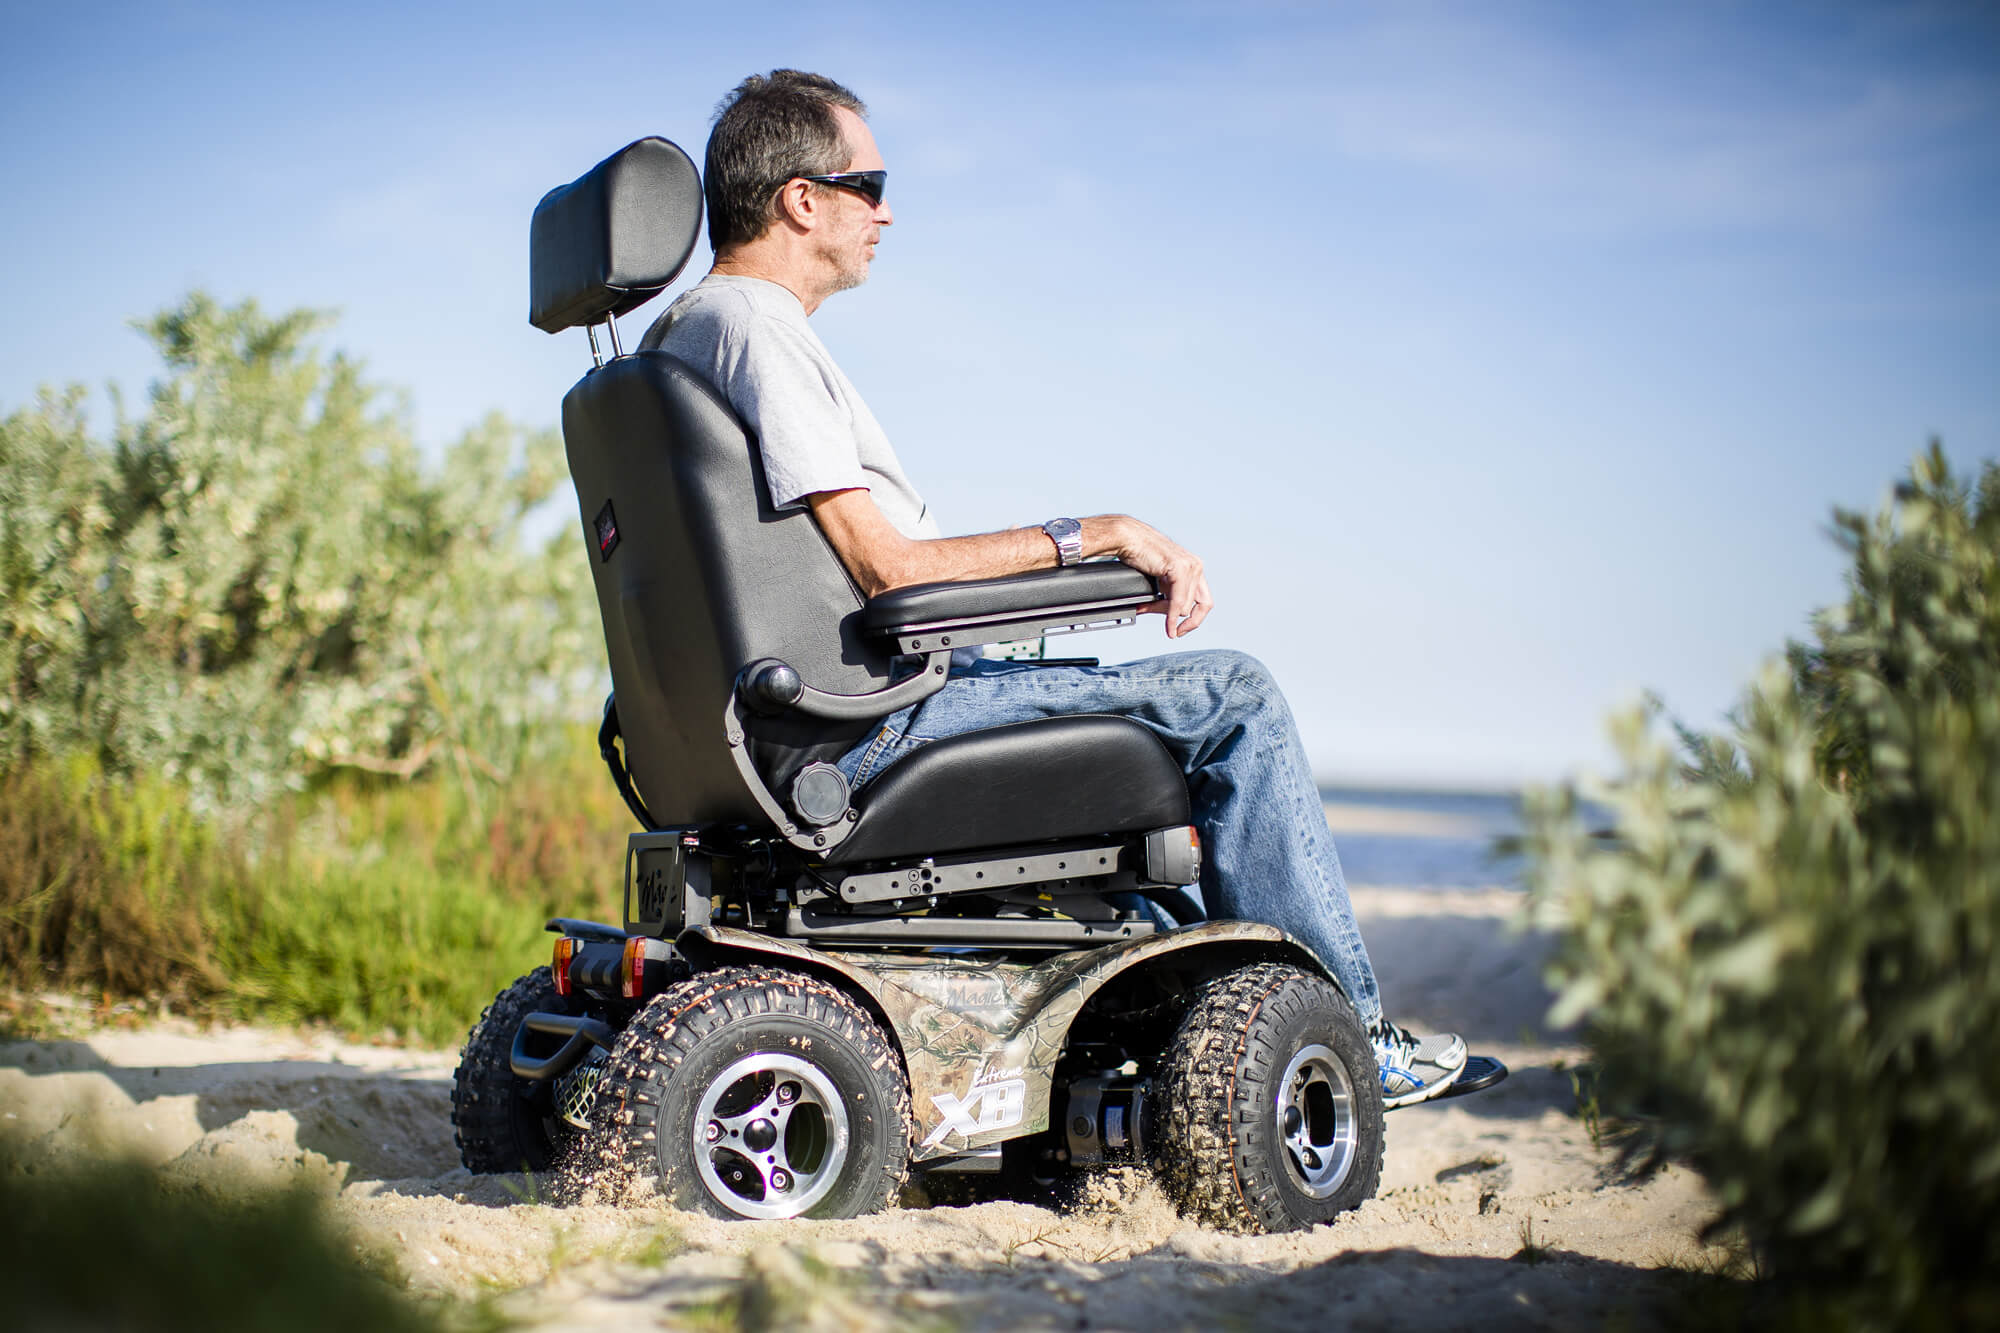 Extreme X8 4x4 Off Road Powered Wheelchair